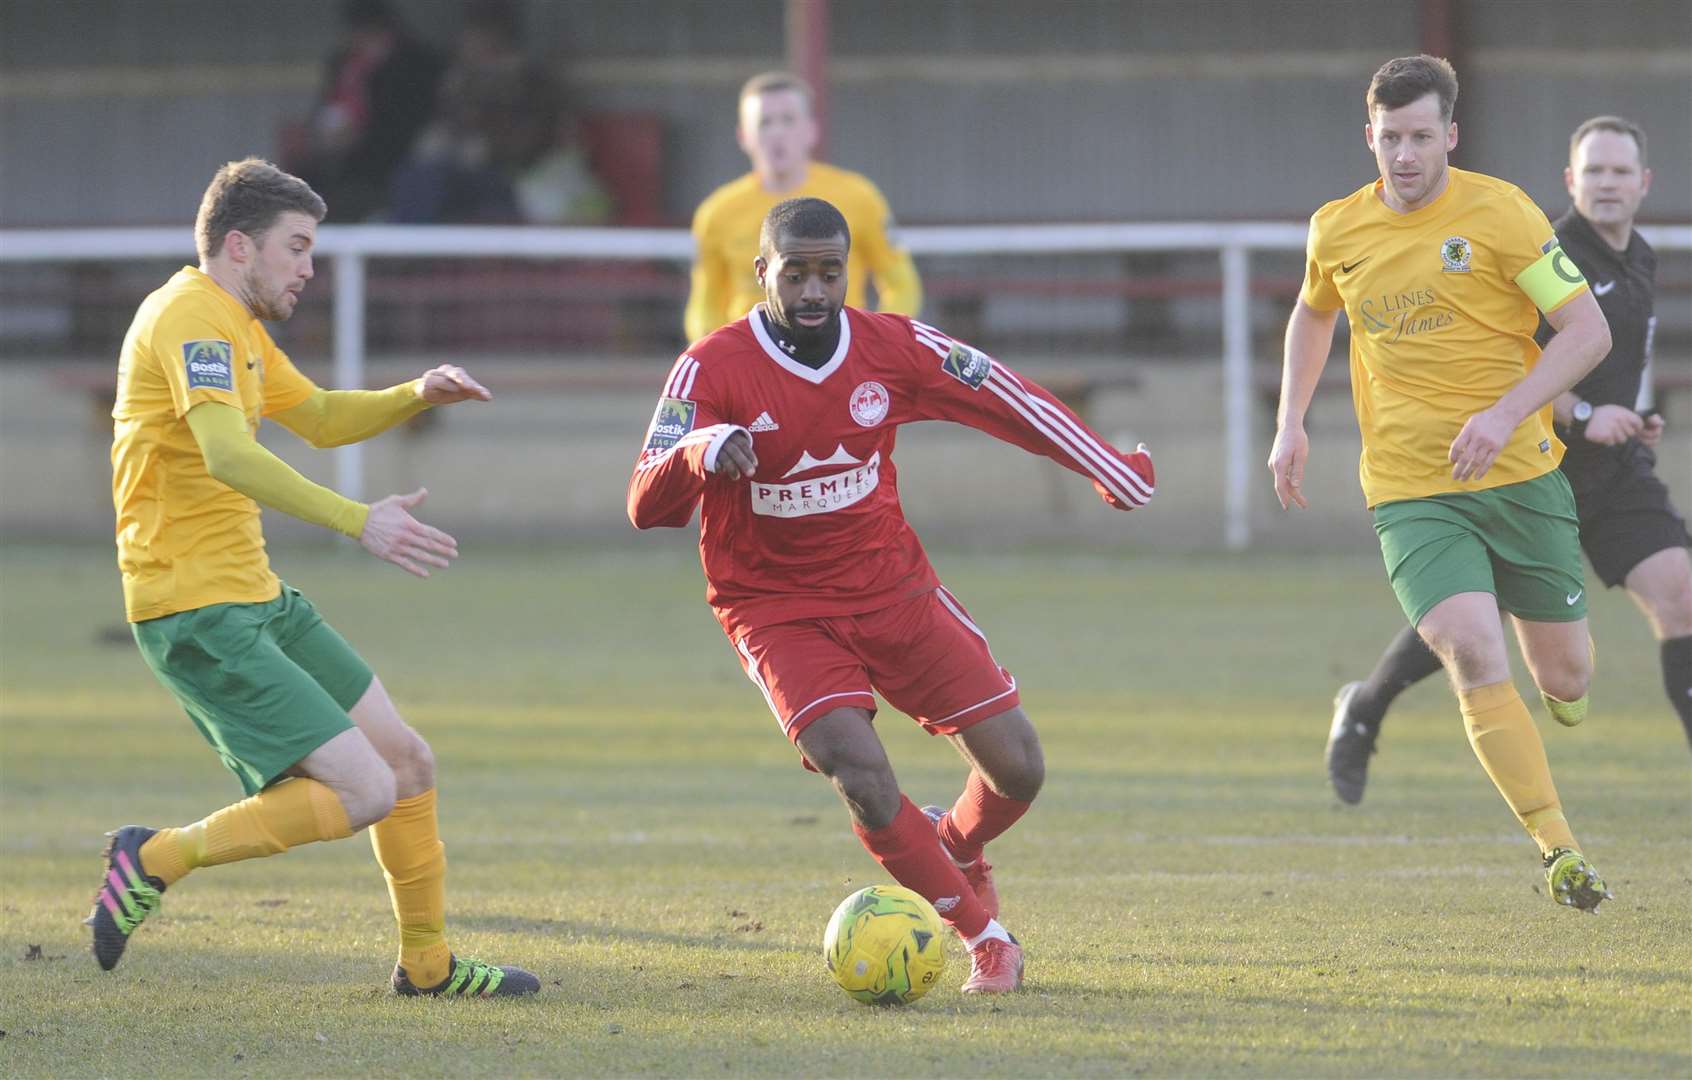 Ryan Palmer on the ball for Hythe Town Picture: Gary Browne